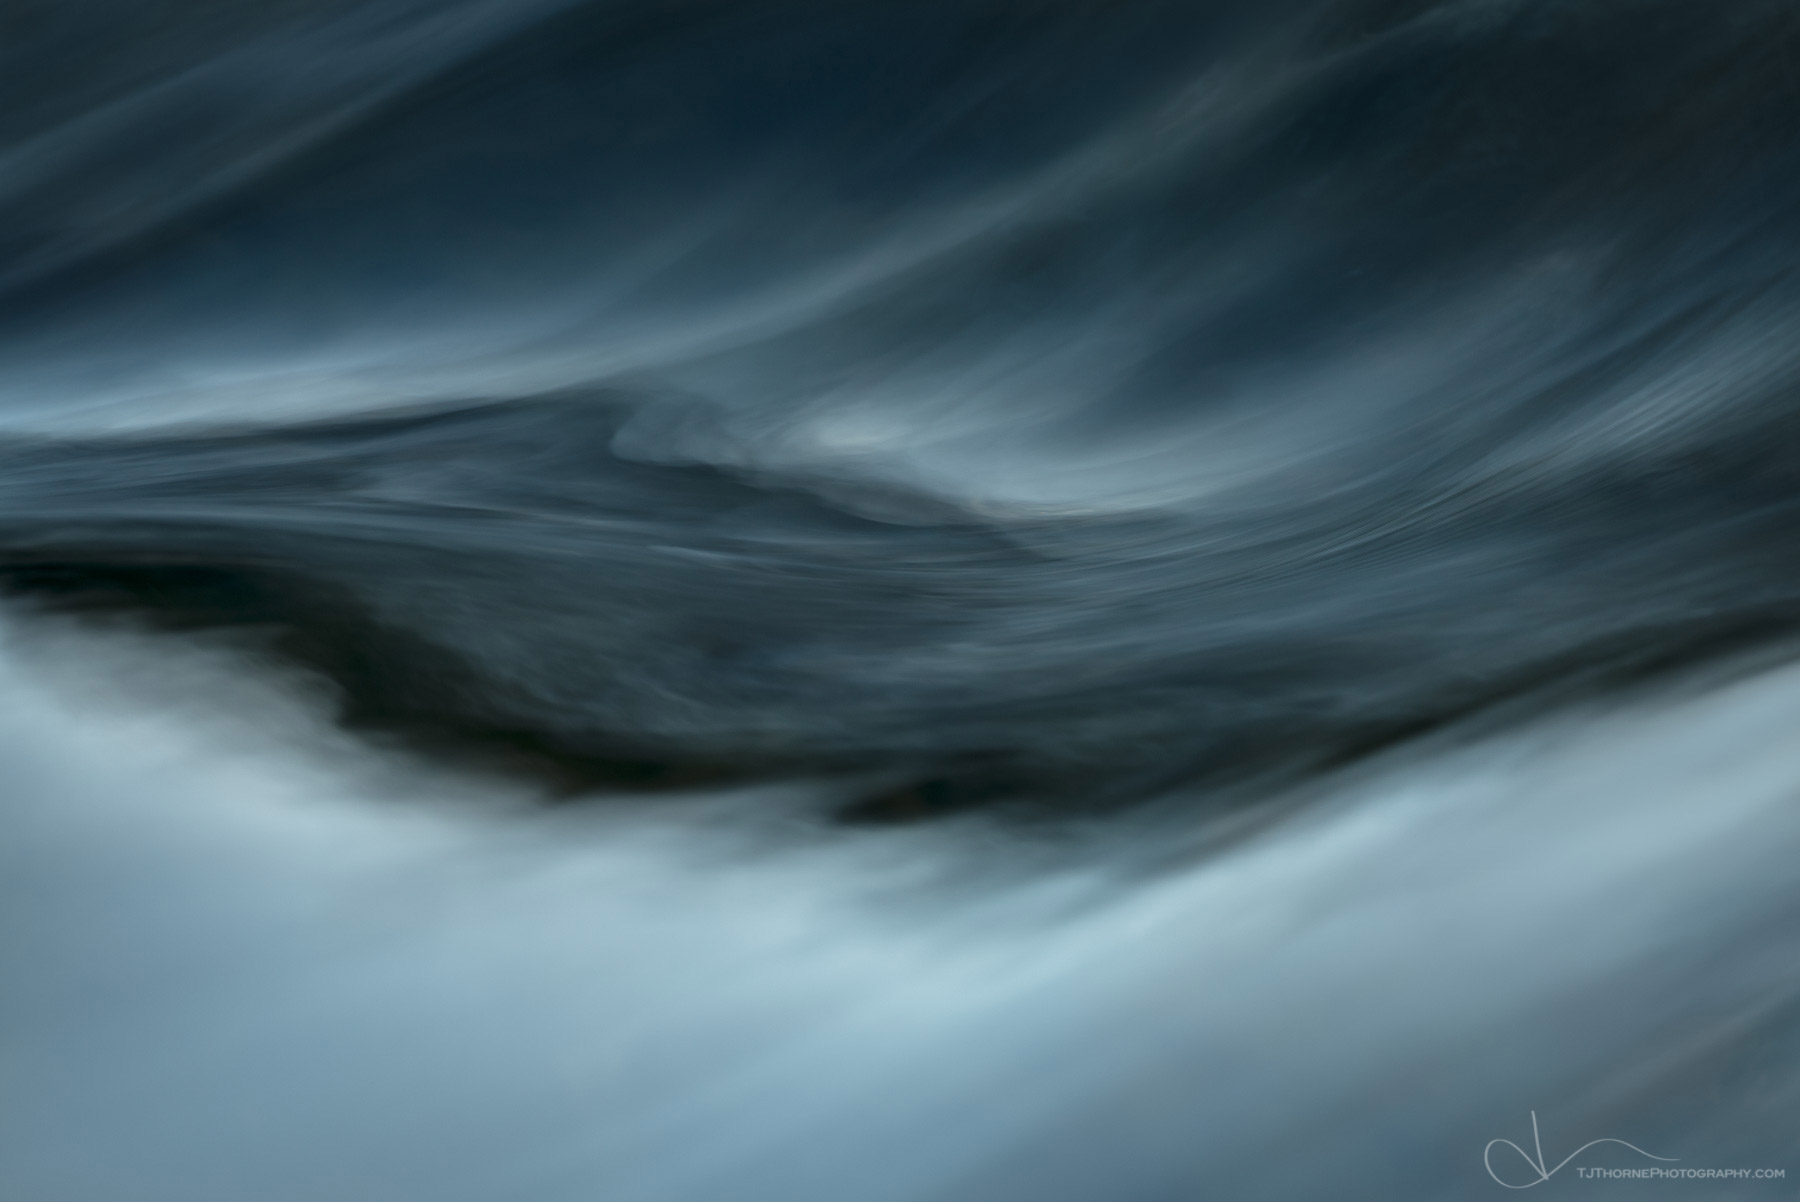 Landscape, abstract, blue, flow, liquid, long exposure, nature, river, smoke, stream, tj thorne, water, wave, wet, ebb and flow...